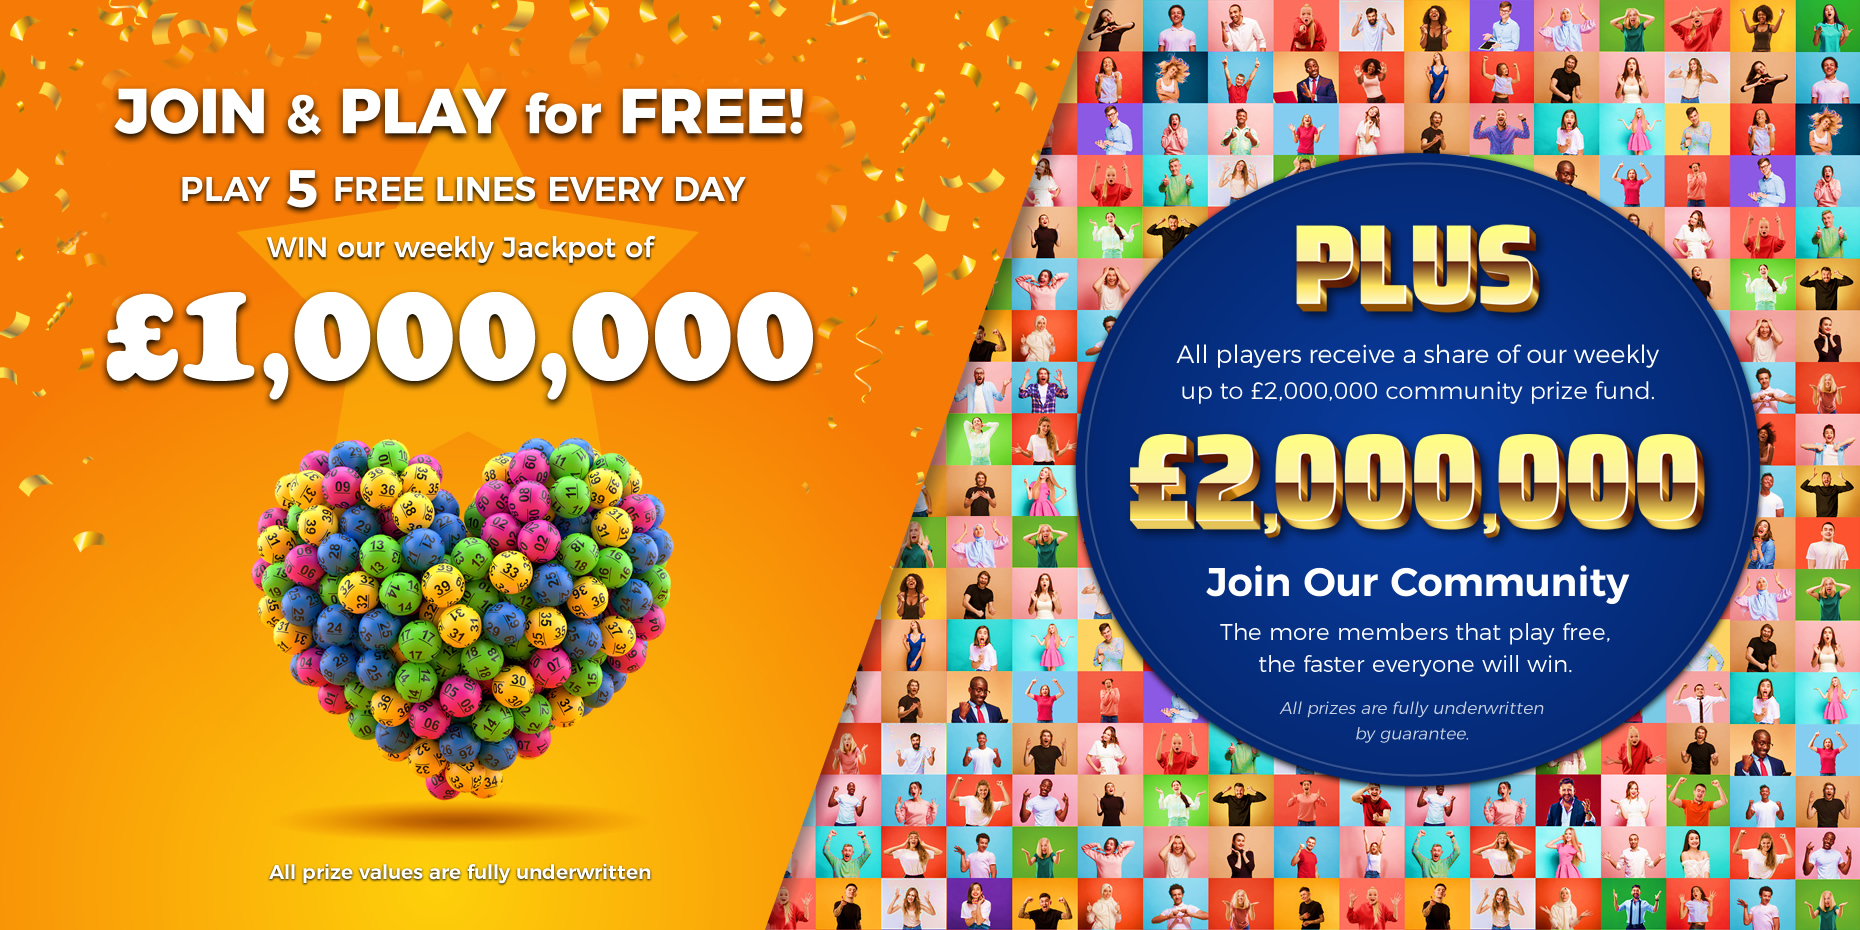 Play 5 FREE Lotto Lines every DAY! - WIN Our £250,000 Jackpot, plus all players receive a share of our up to one million pound community prize fund!